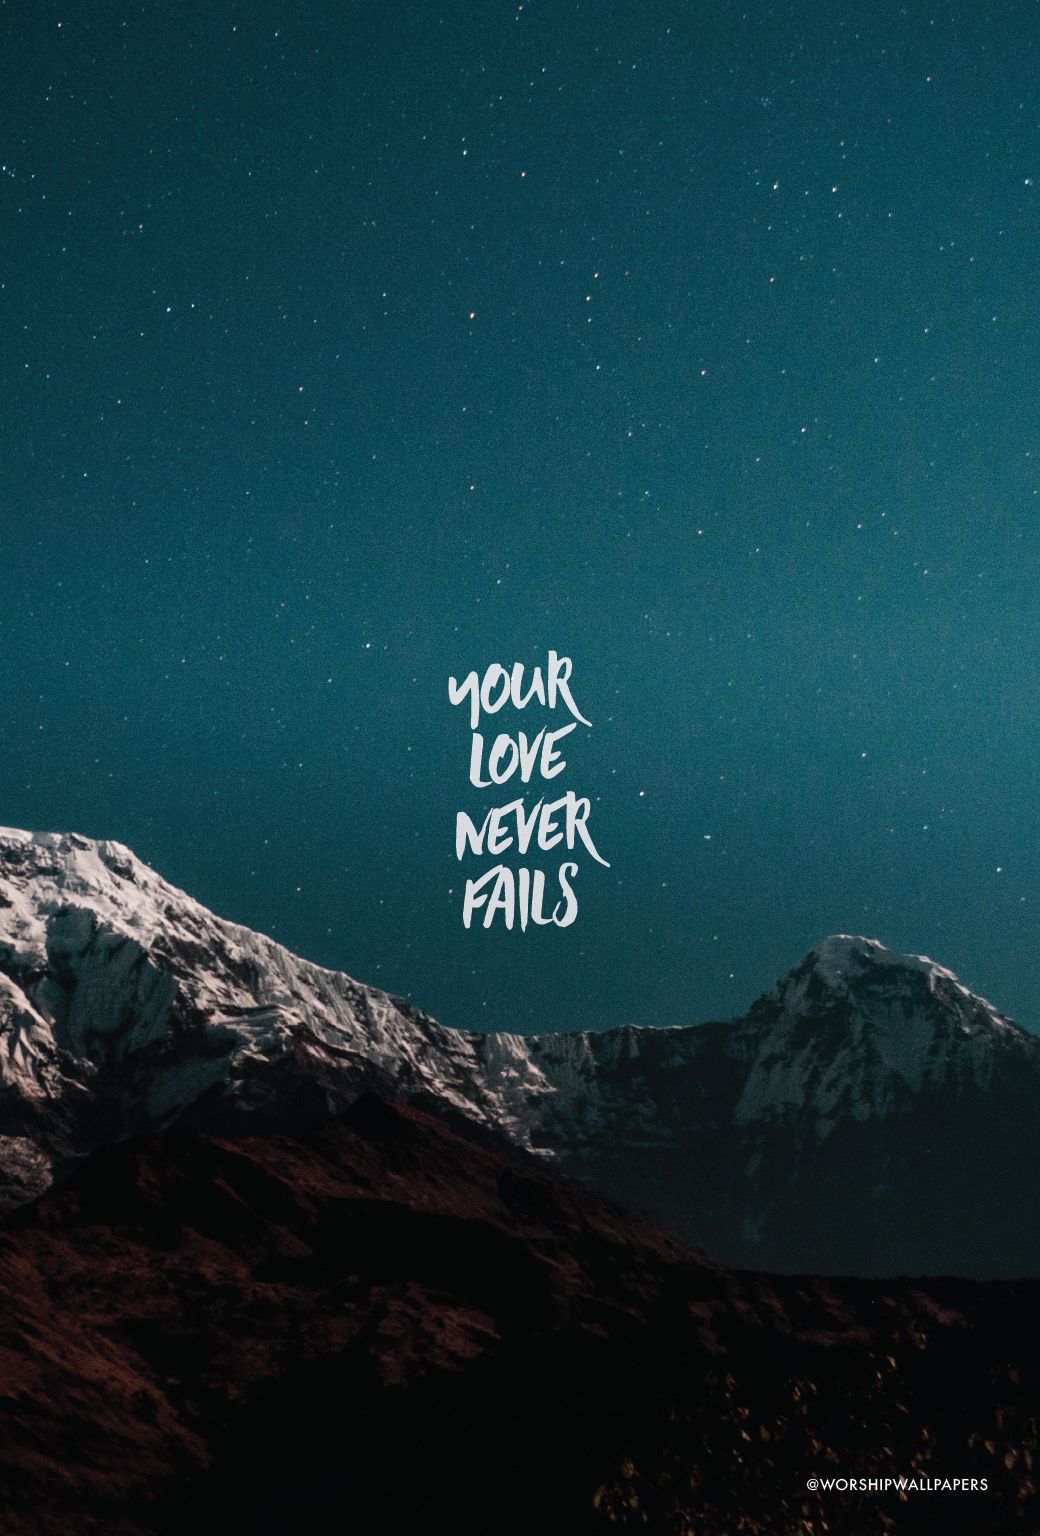 Lworship Wallpaper Designed From Your Love Never Fails By Jesus